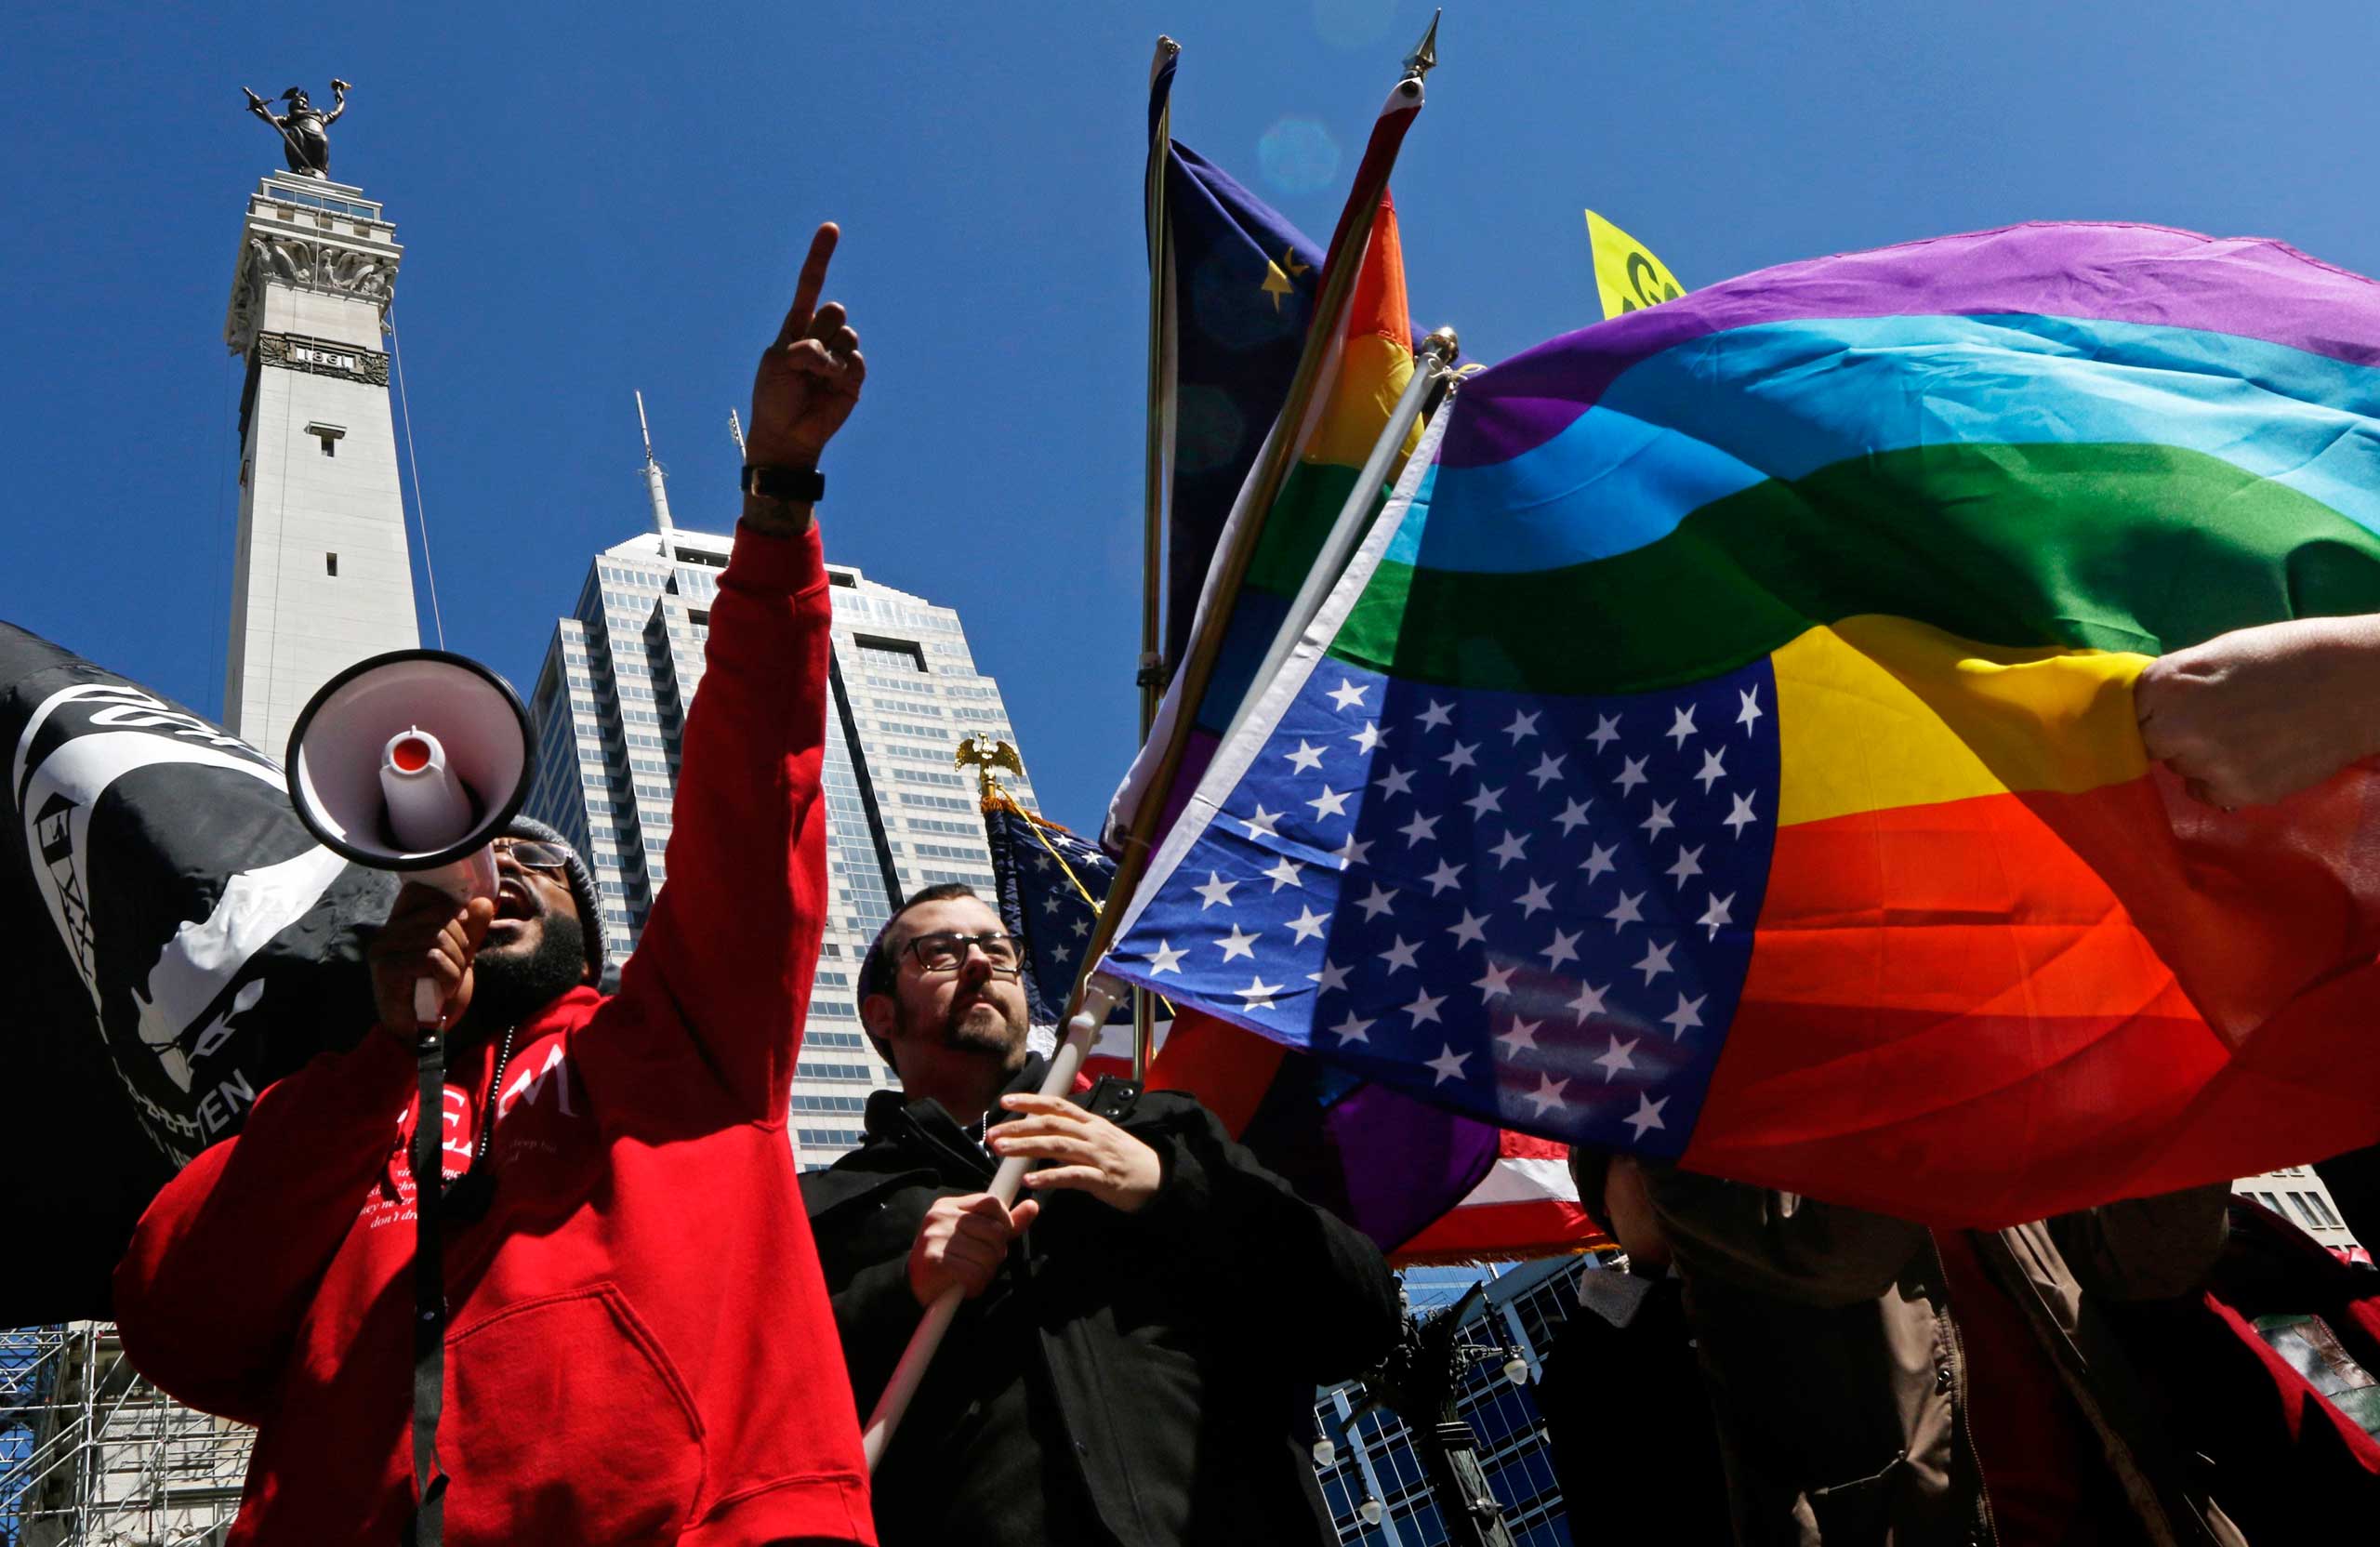 Organizers fire up a crowd of demonstrators gathered to protest a controversial religious freedom bill recently signed by Governor Mike Pence, in Indianapolis March 28, 2015. (Nate Chute—Reuters)